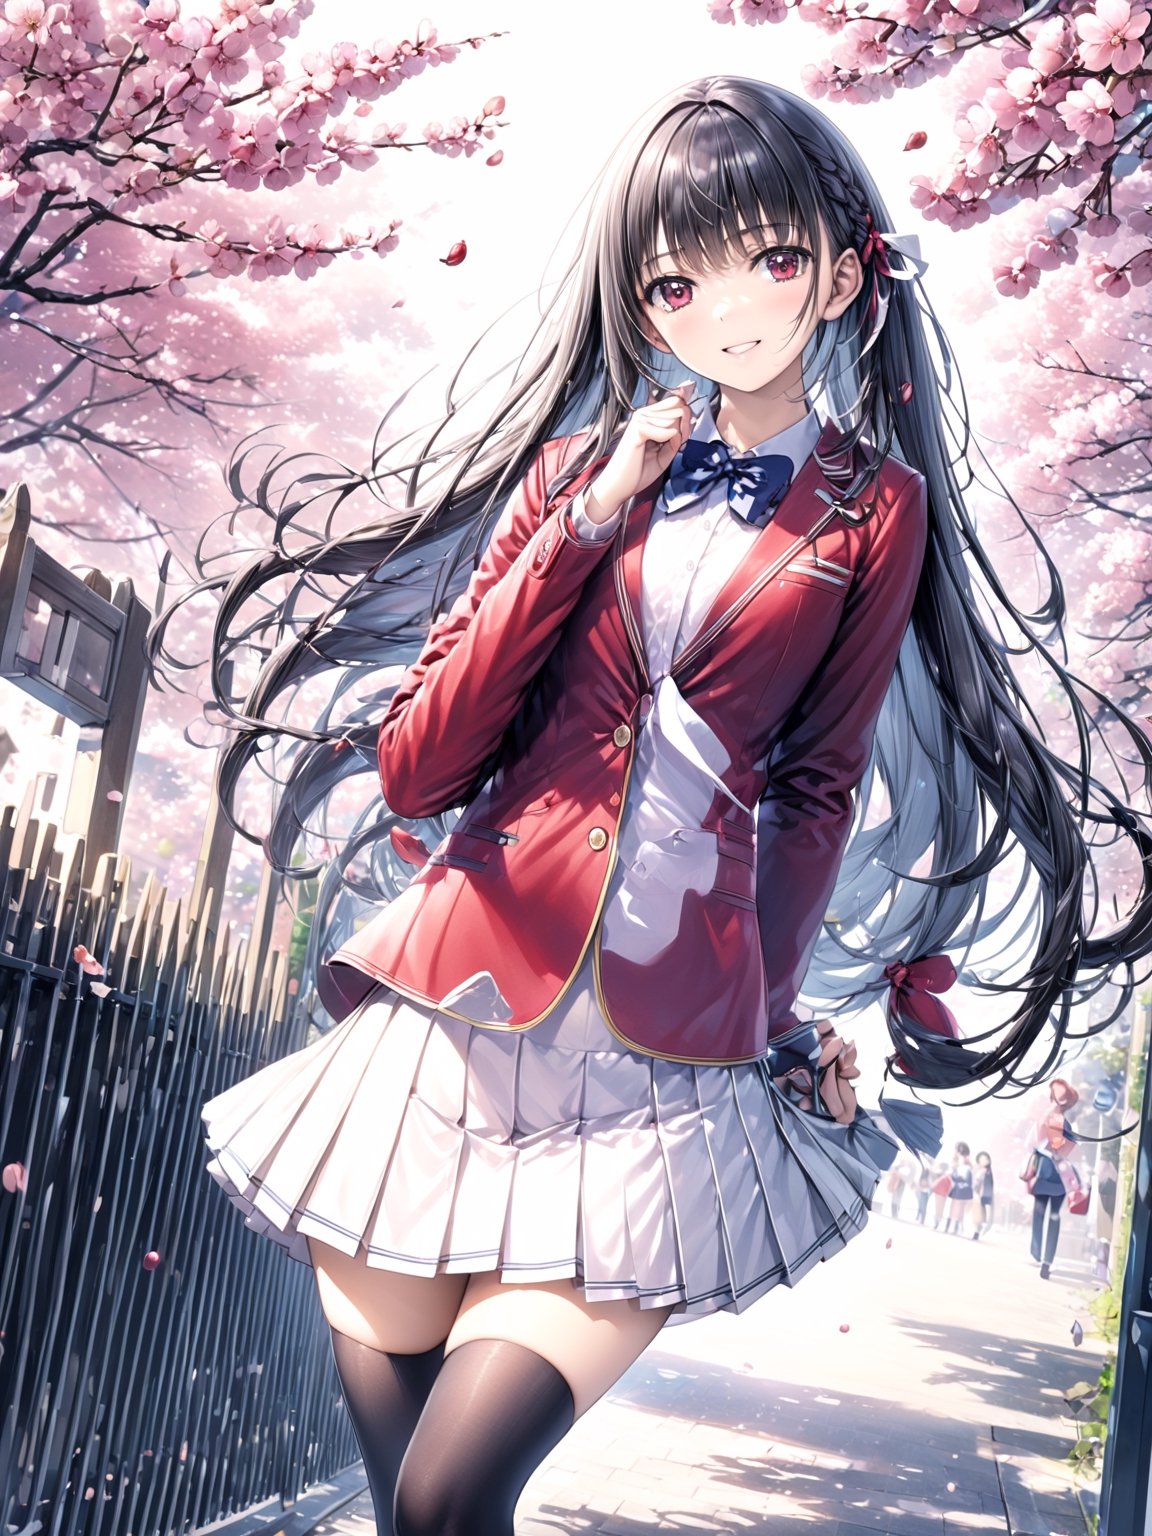 //Quality,
masterpiece, best quality, detailed
,//Character,
,HorikitaSuzune, 1girl, solo, long hair, black hair, shiny hair, red eyes, bangs, braid
,//Fashion,
school uniform, red jacket, hair ribbon, white shirt, pleated skirt, thighhighs
,//Background,
Cherry blossoms, school gate
,//Others,
graduation, smile